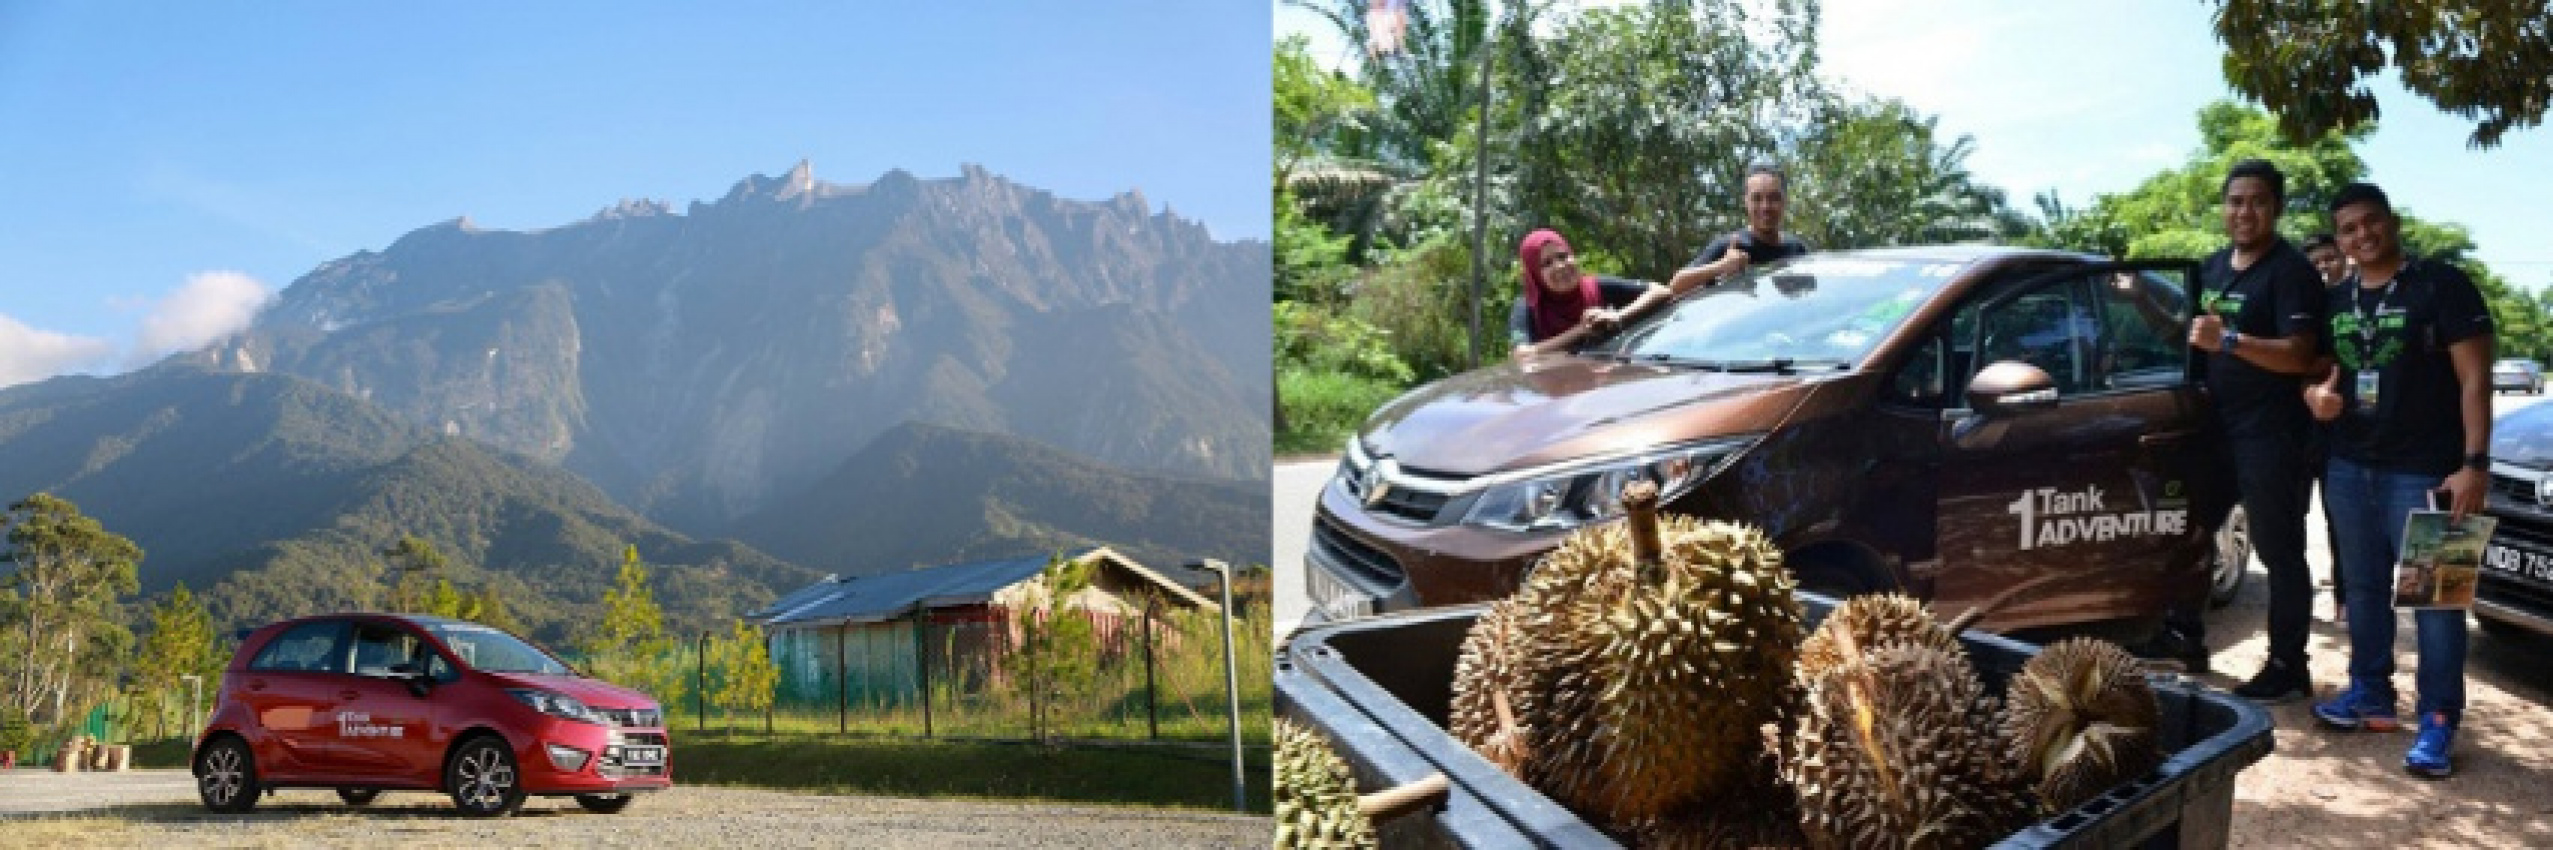 autos, cars, 1 tank adventure, competition, fuel consumption, fuel efficiency, proton 1-tank adventure, proton iriz, proton persona, proton saga, proton’s ‘1 tank adventure’ invites owners to experience the sights, sounds and cuisine of malaysia while driving economically